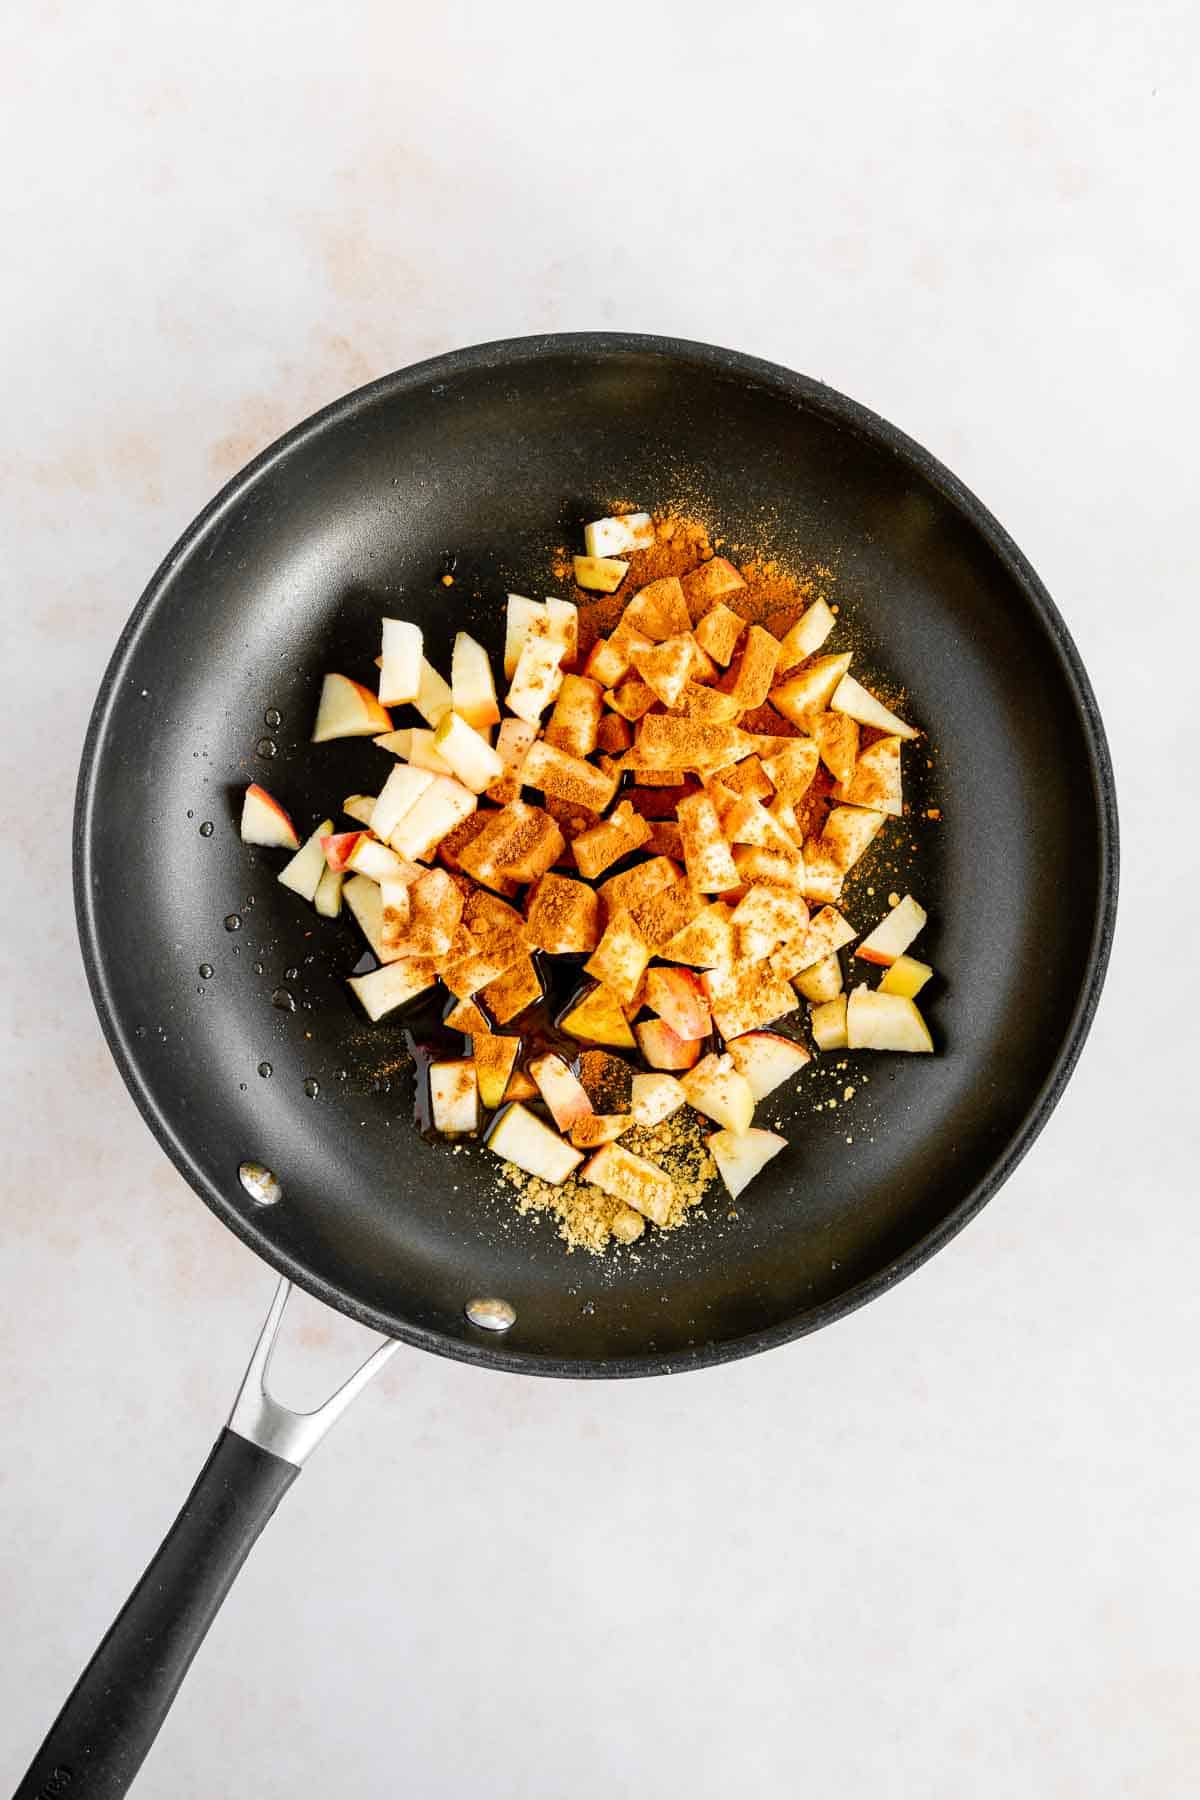 diced apples on a pan with cinnamon, ginger, and nutmeg